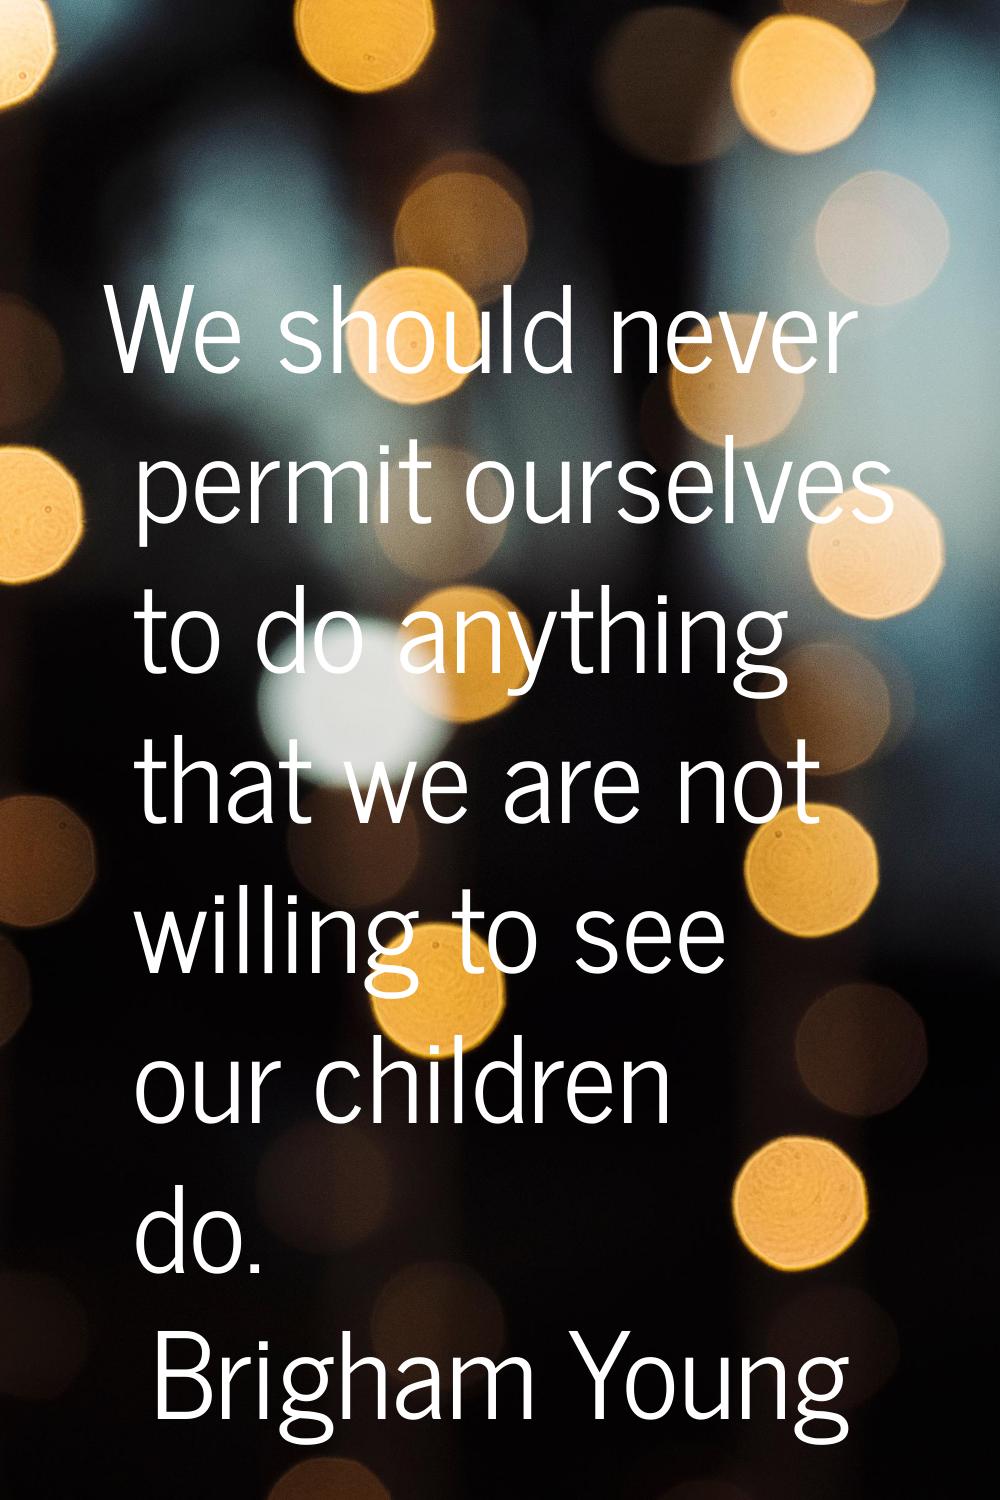 We should never permit ourselves to do anything that we are not willing to see our children do.